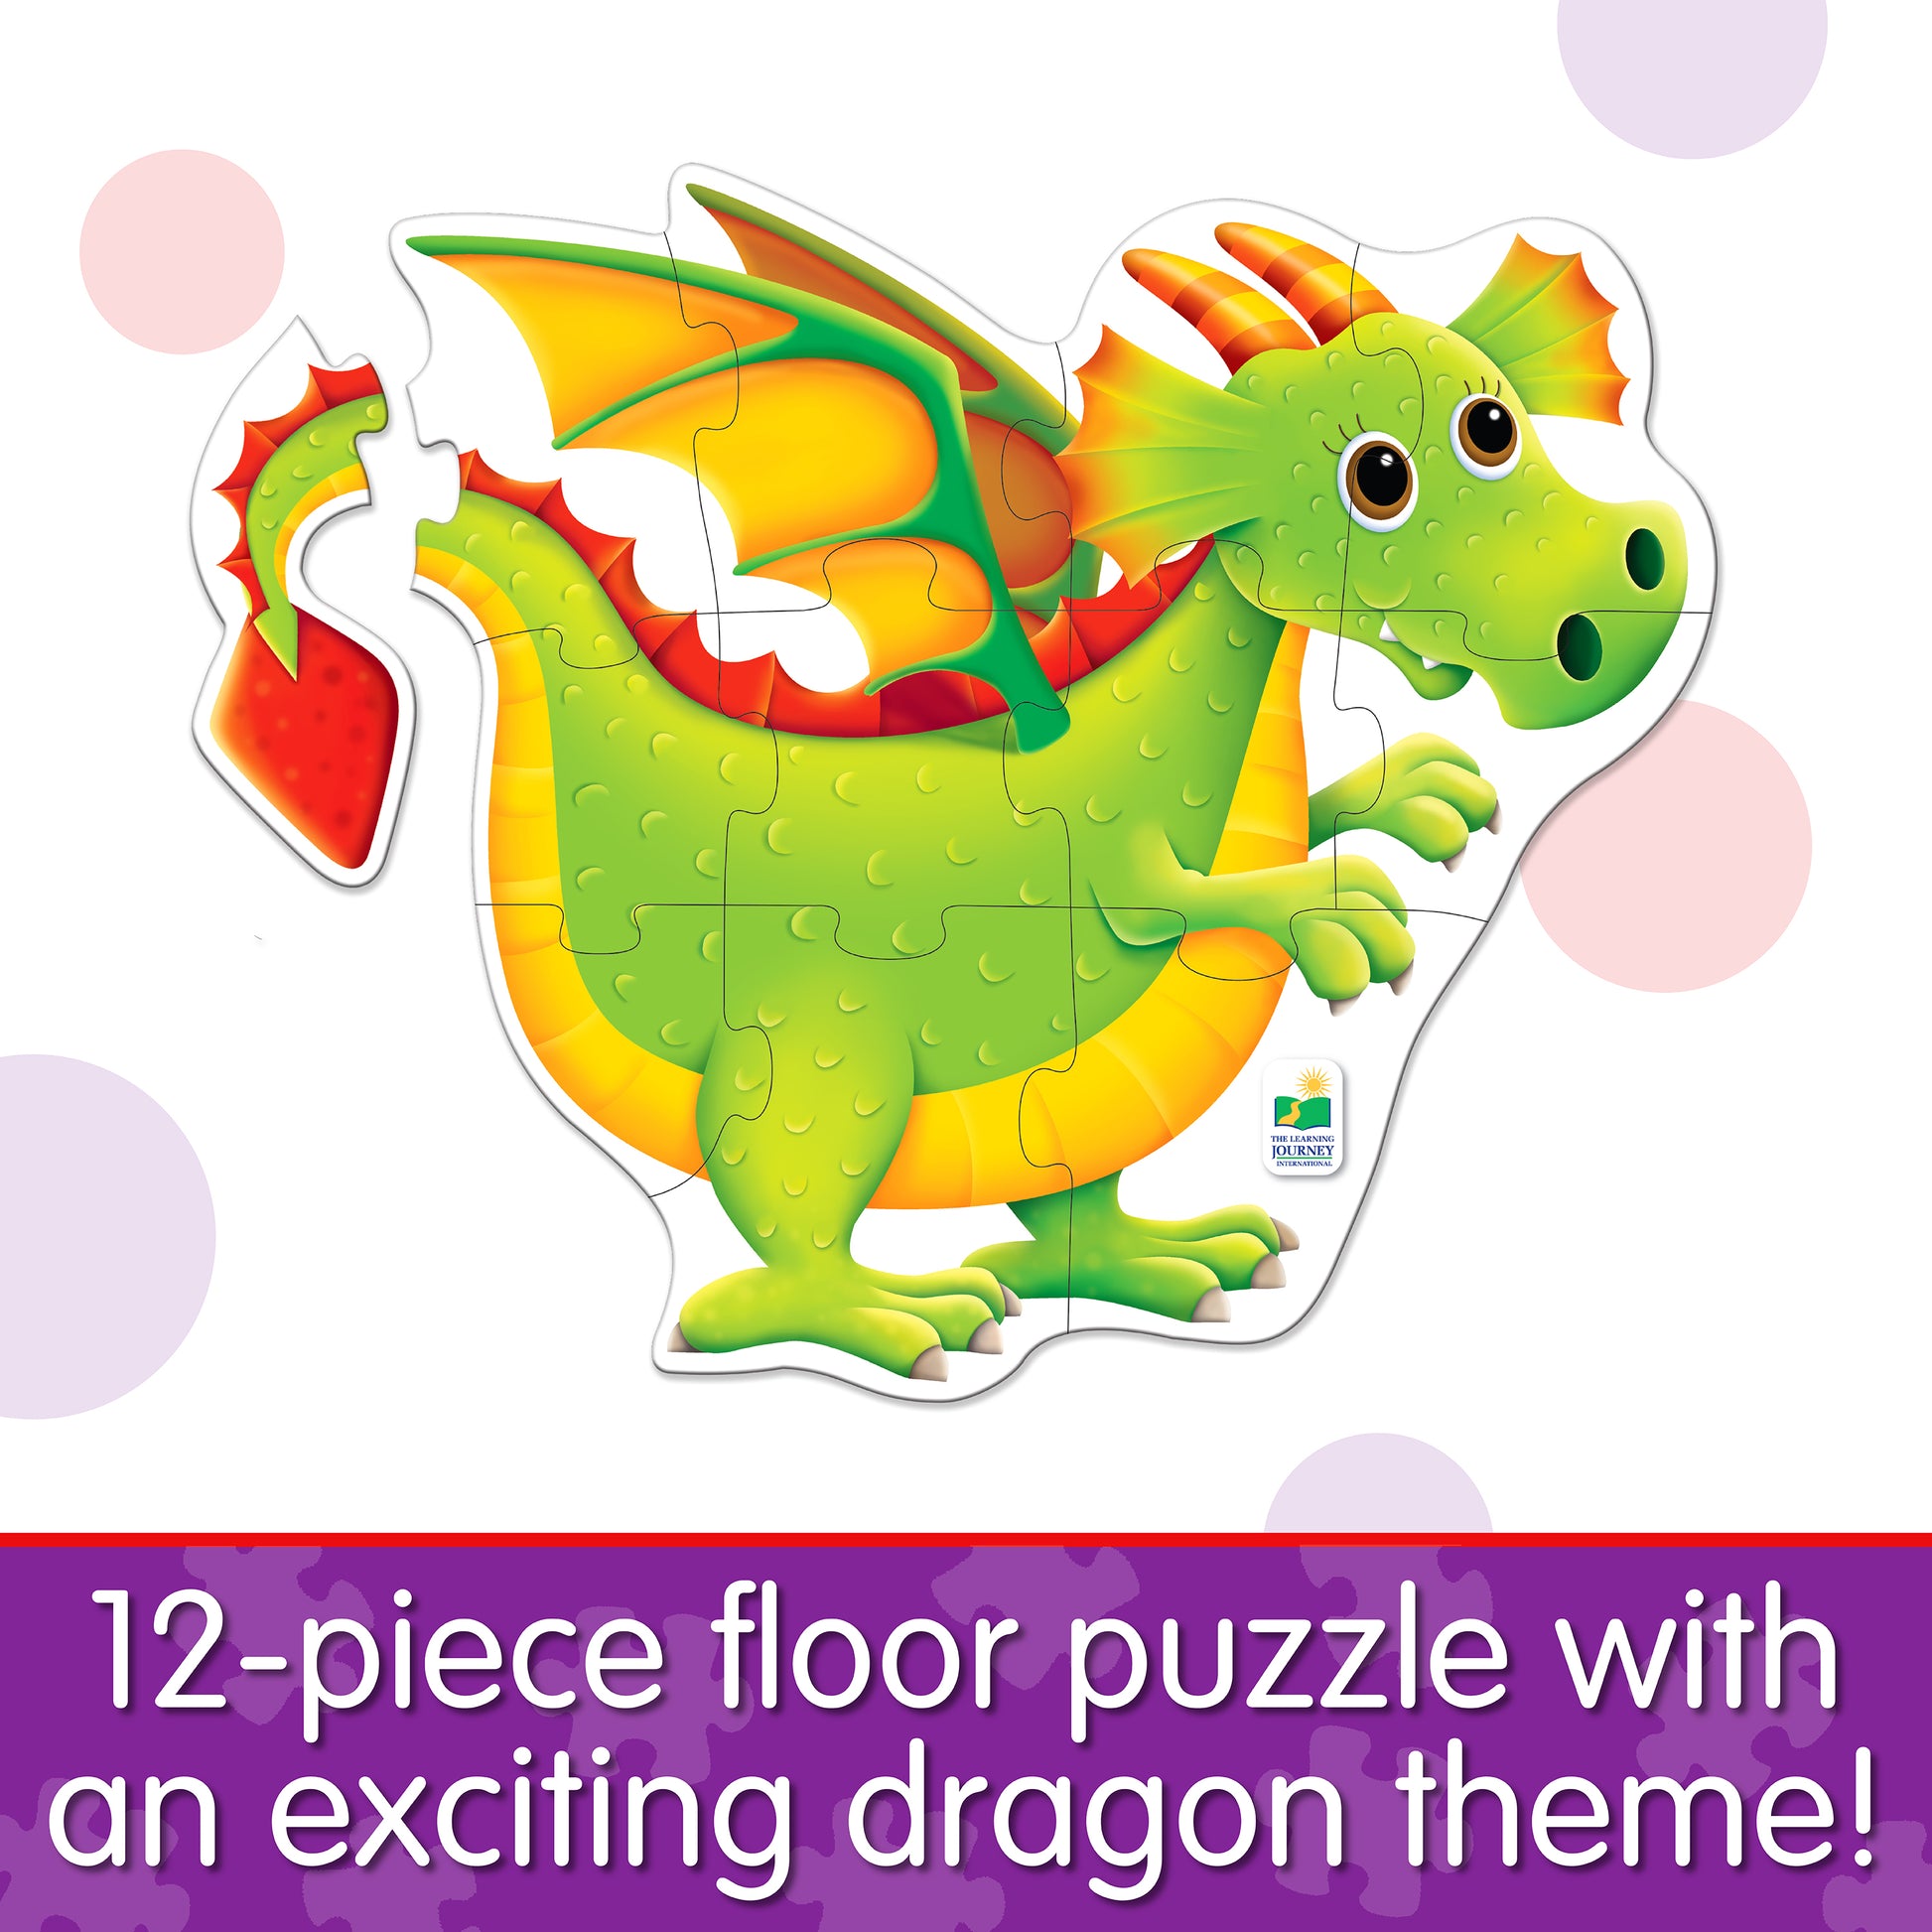 Infographic about My First Big Puzzle - Dragon that says, "12-piece floor puzzle with an exciting dragon theme!"